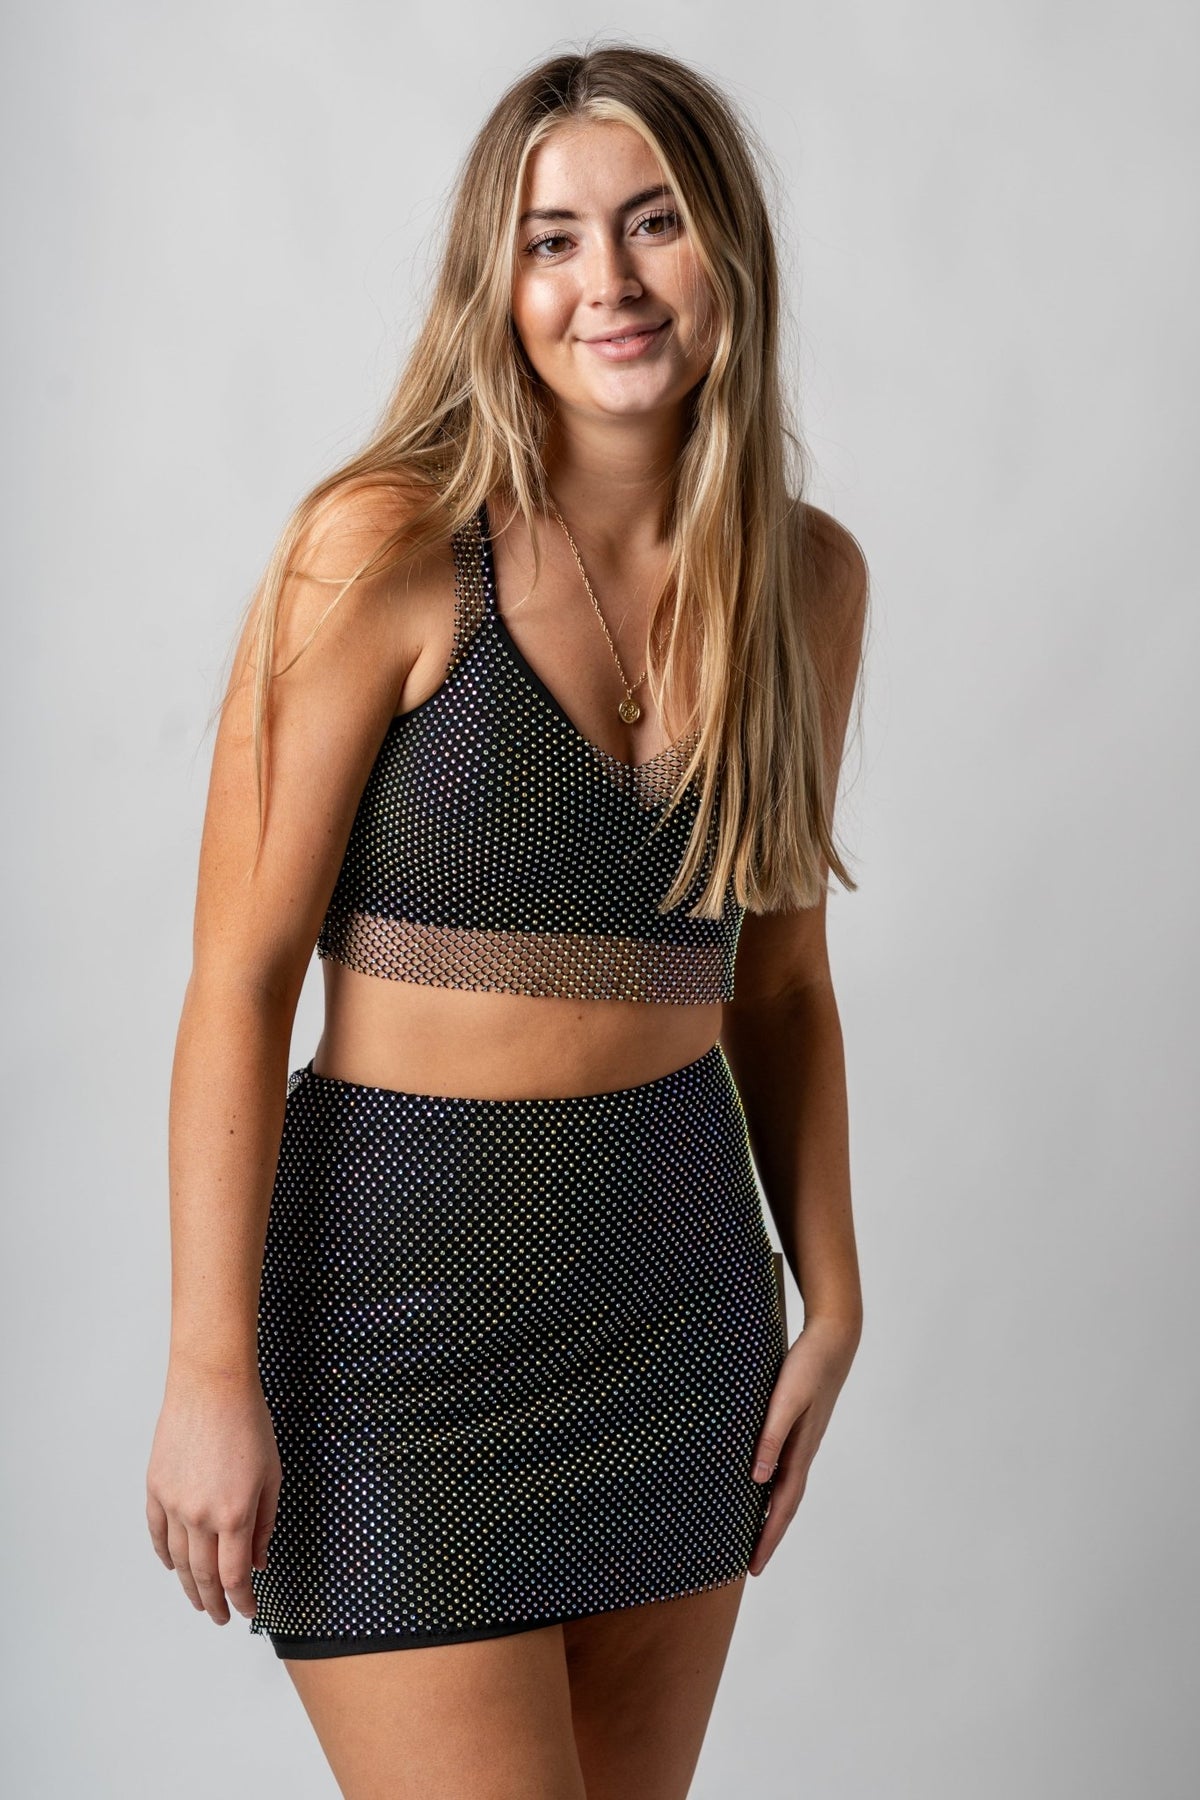 Rhinestone mesh bralette black - Cute Tank Top - Trendy Bras and Bralettes at Lush Fashion Lounge Boutique in Oklahoma City